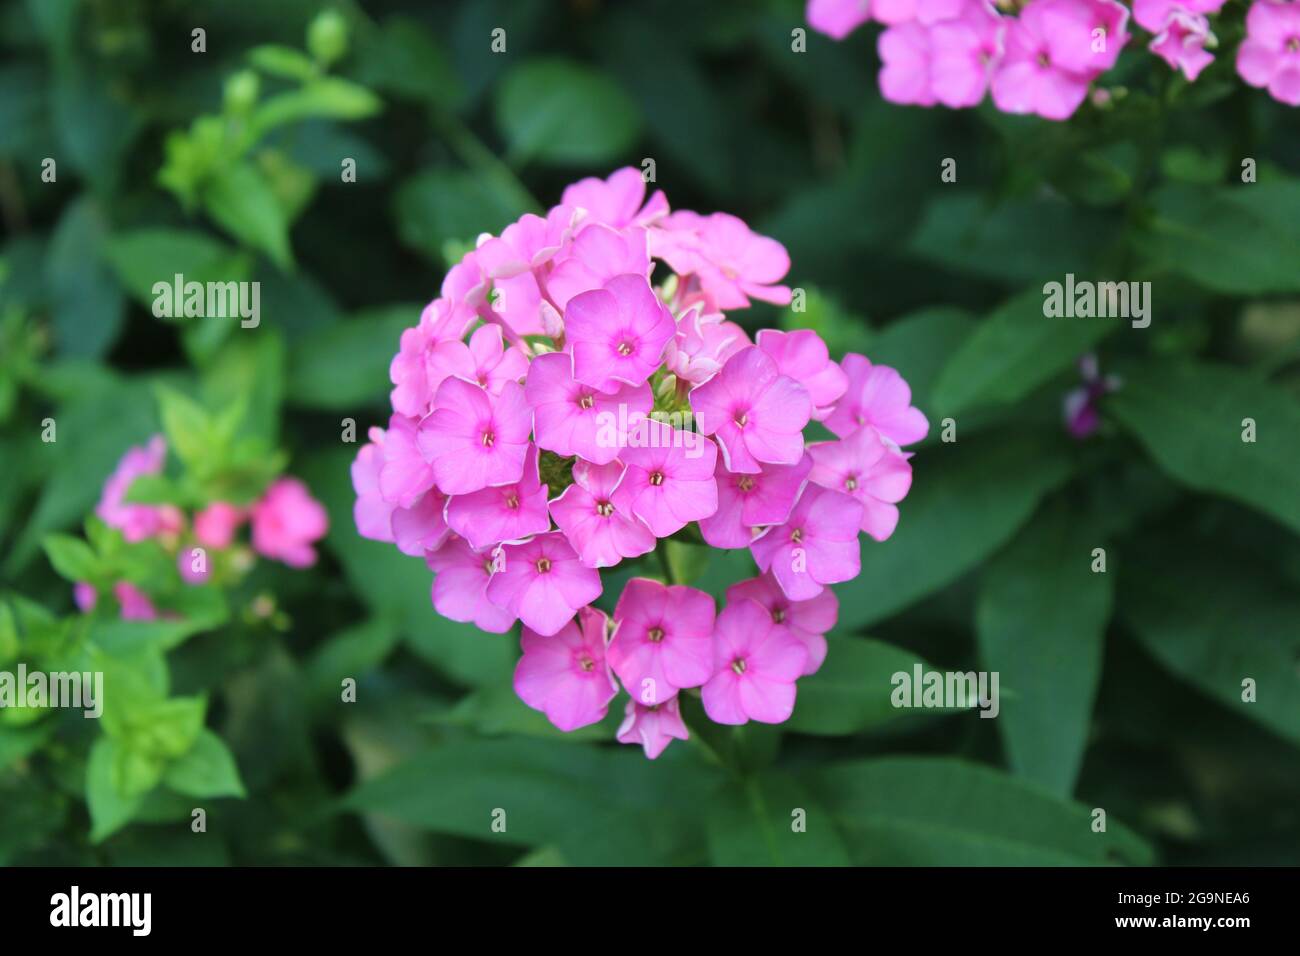 A Cluster of Pink Phlox Flowers in Bloom Stock Photo